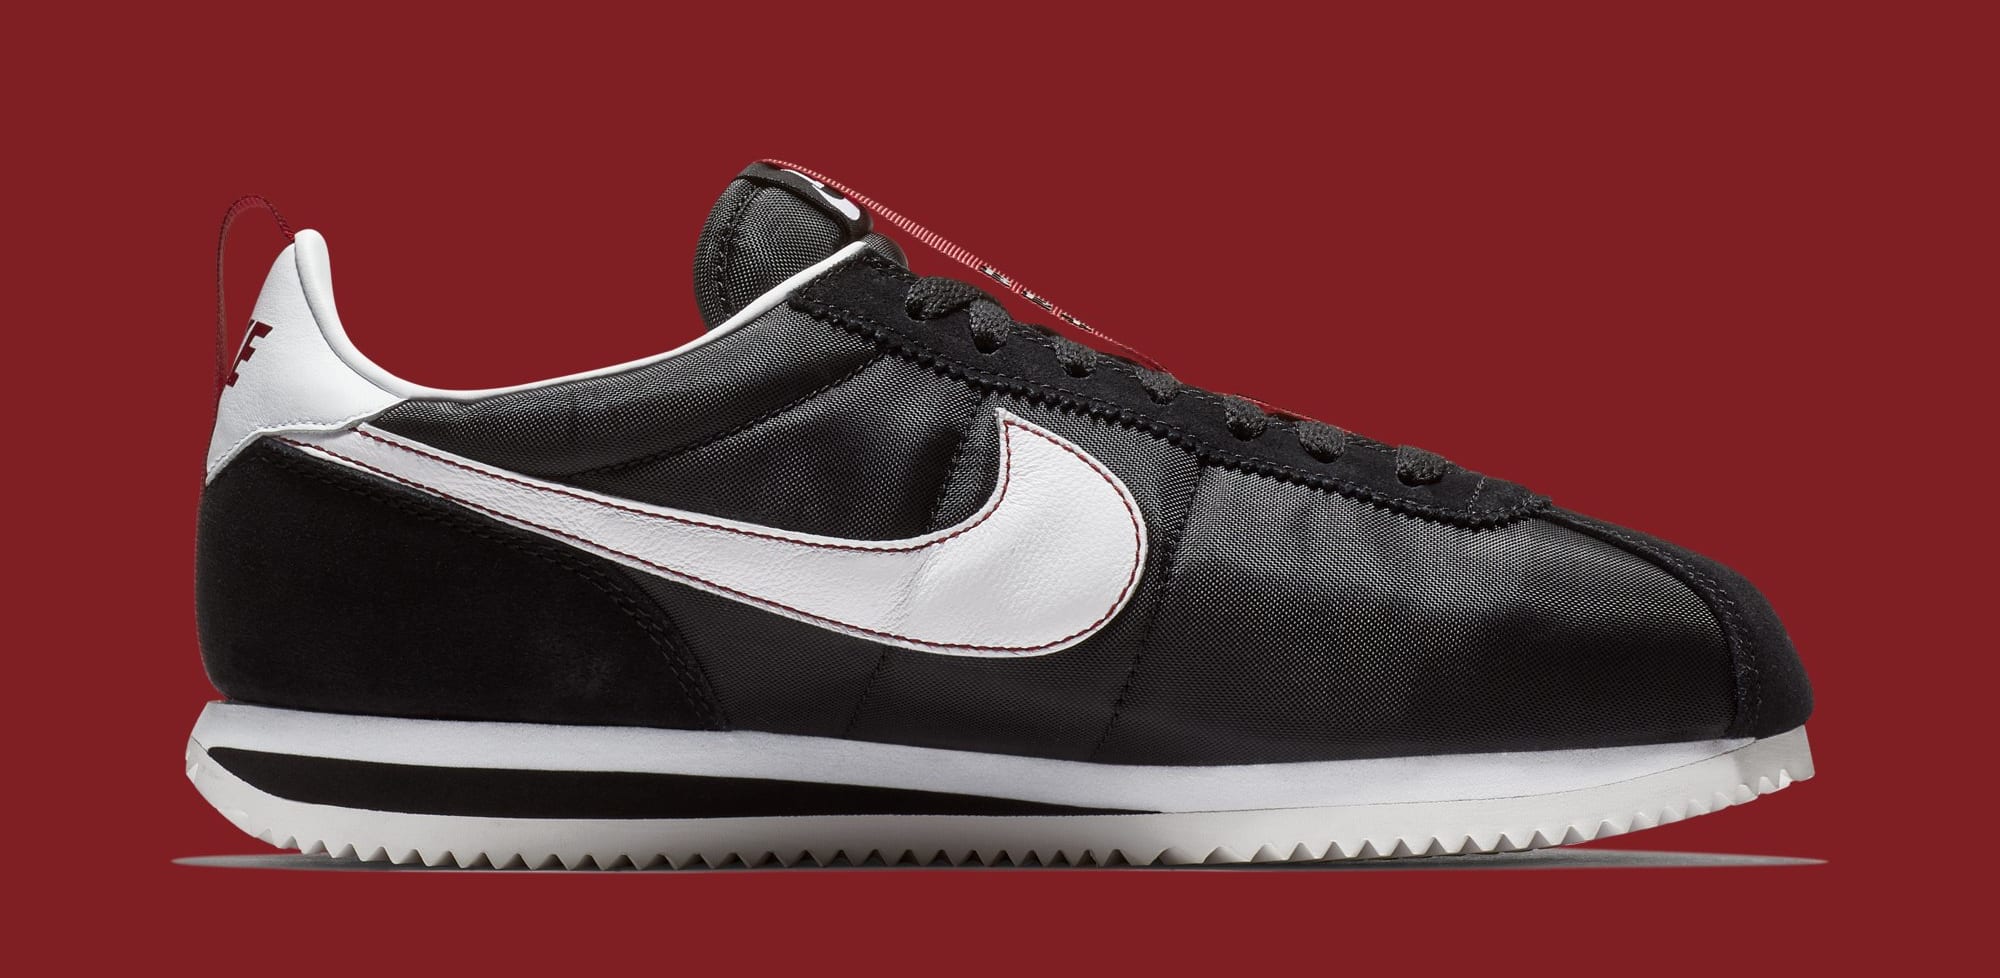 Detailed Look at the Kendrick Lamar x Nike Cortez Kenny 3 | Complex